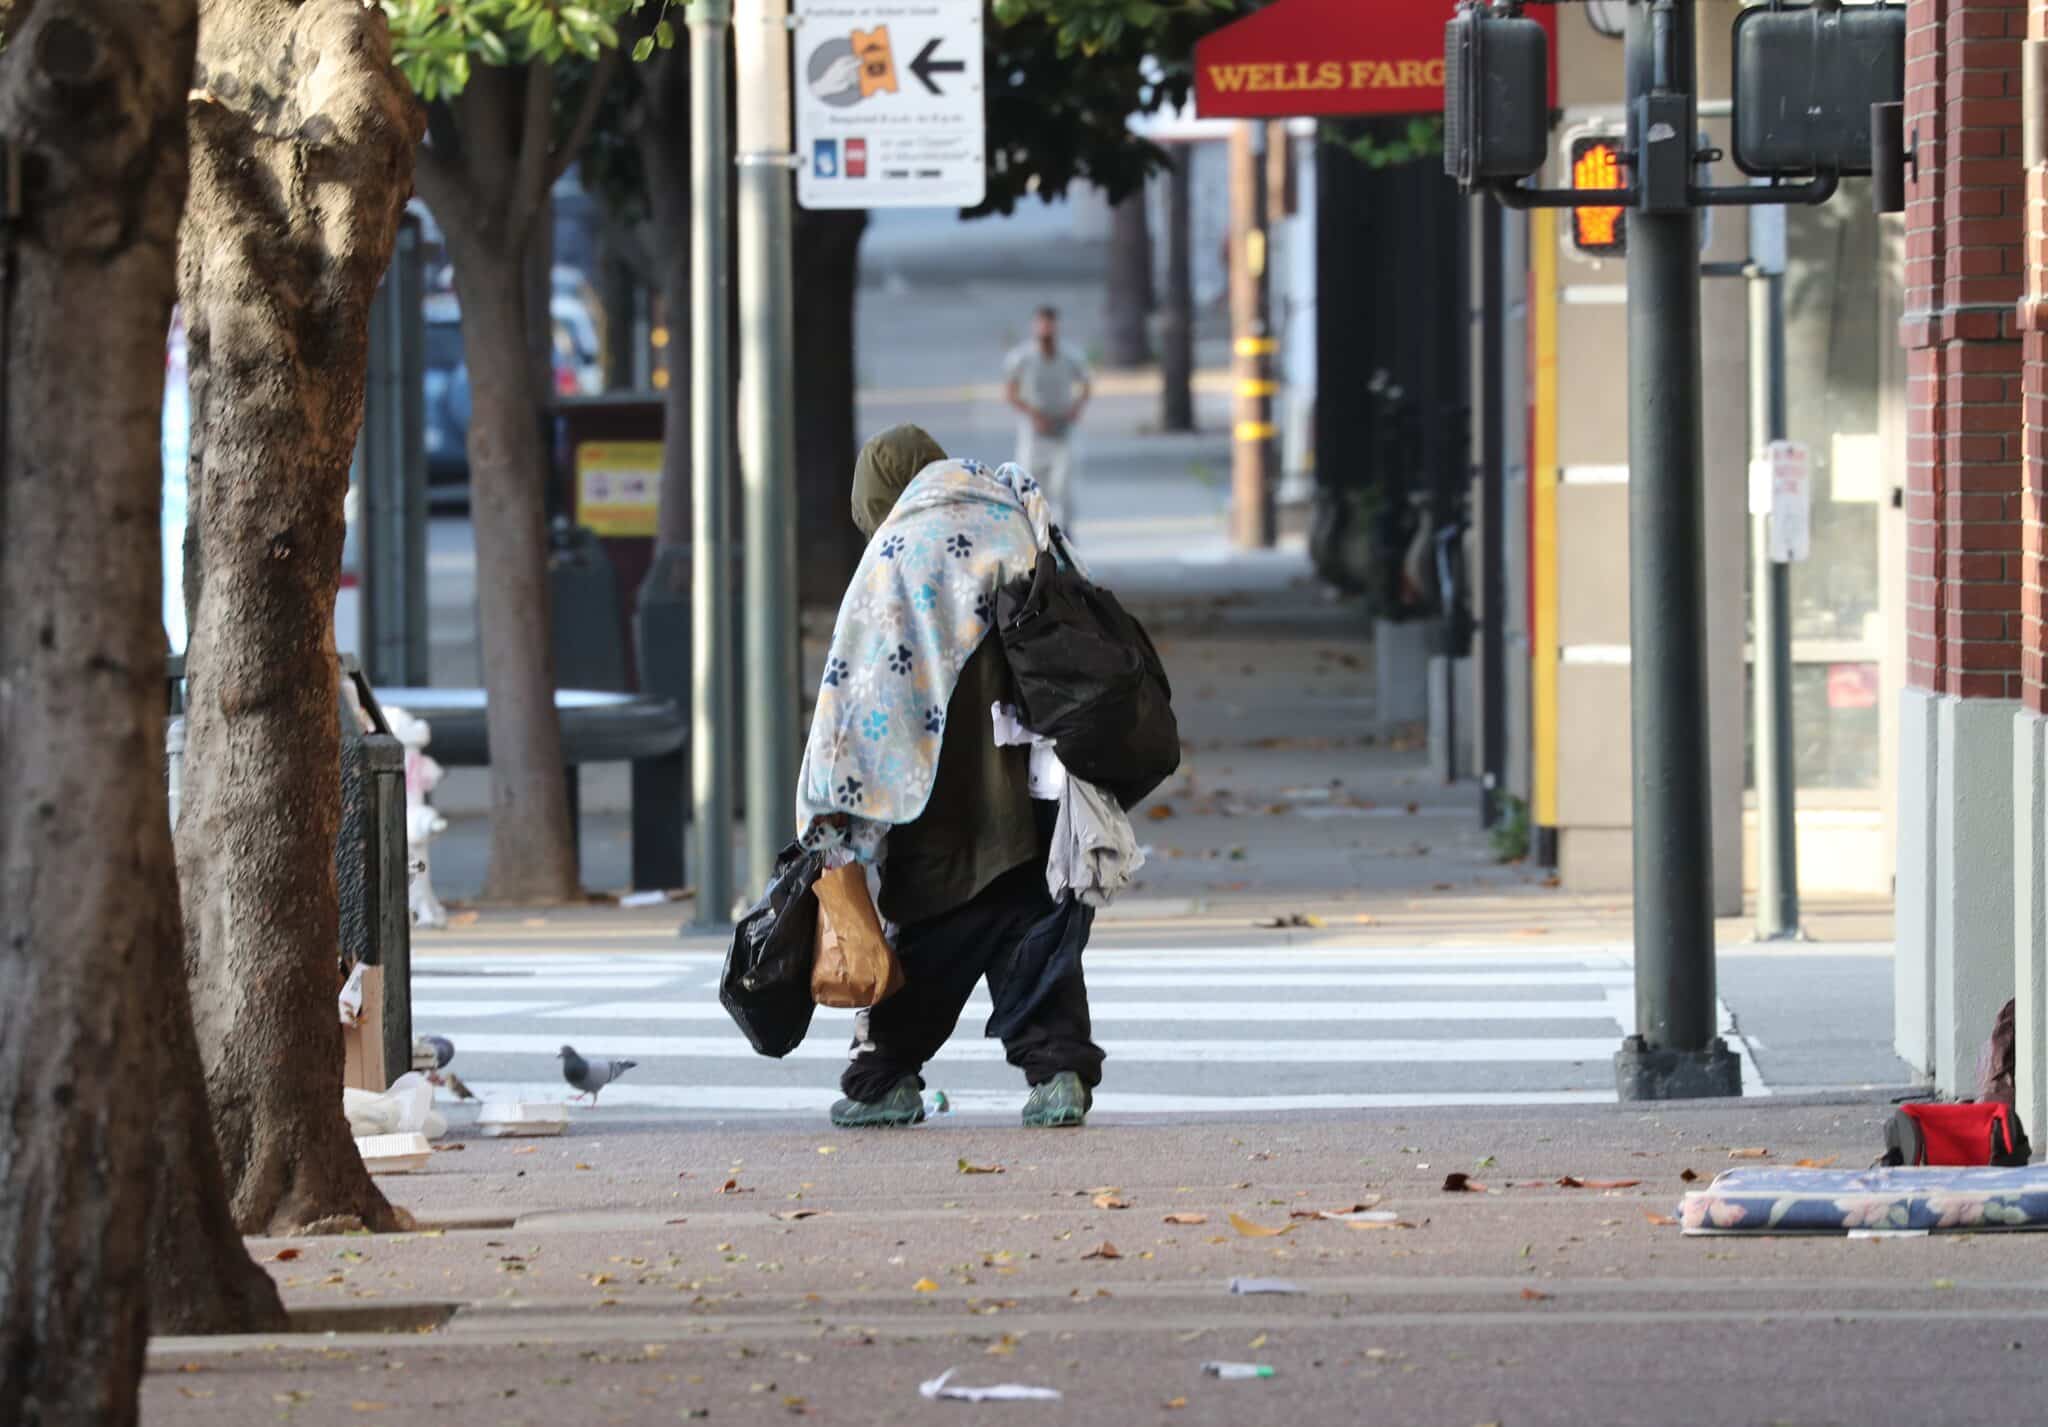 A homeless man carries his belongings along a street in San Francisco May 19, 2024. The needs of the homeless and other vulnerable groups in the U.S. have been among the concerns of the U.S. bishops' Catholic Campaign for Human Development as it has provided grants, through an application process, to groups that address societal issues. Other target projects of CCHD, founded in 1970, have included voter registration, credit unions, job training programs, cooperatives and nonprofit housing corporations.